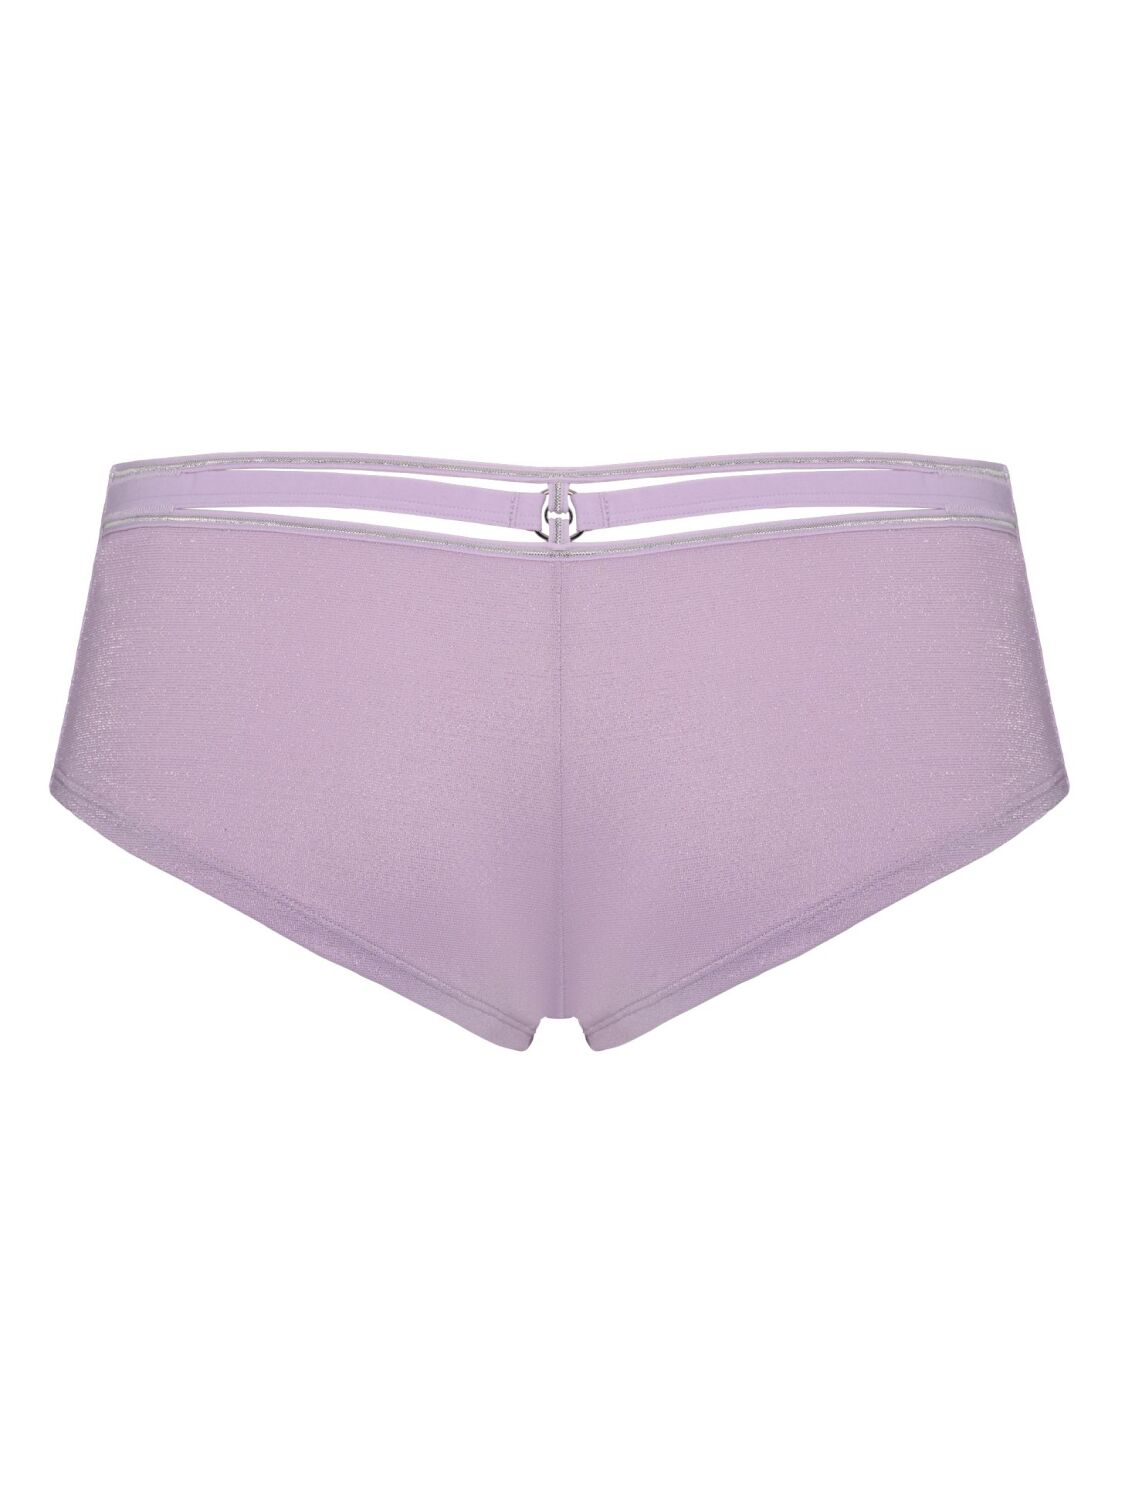 Marlies Dekkers Shorty Space Odyssey Farbe Lilac Lurex